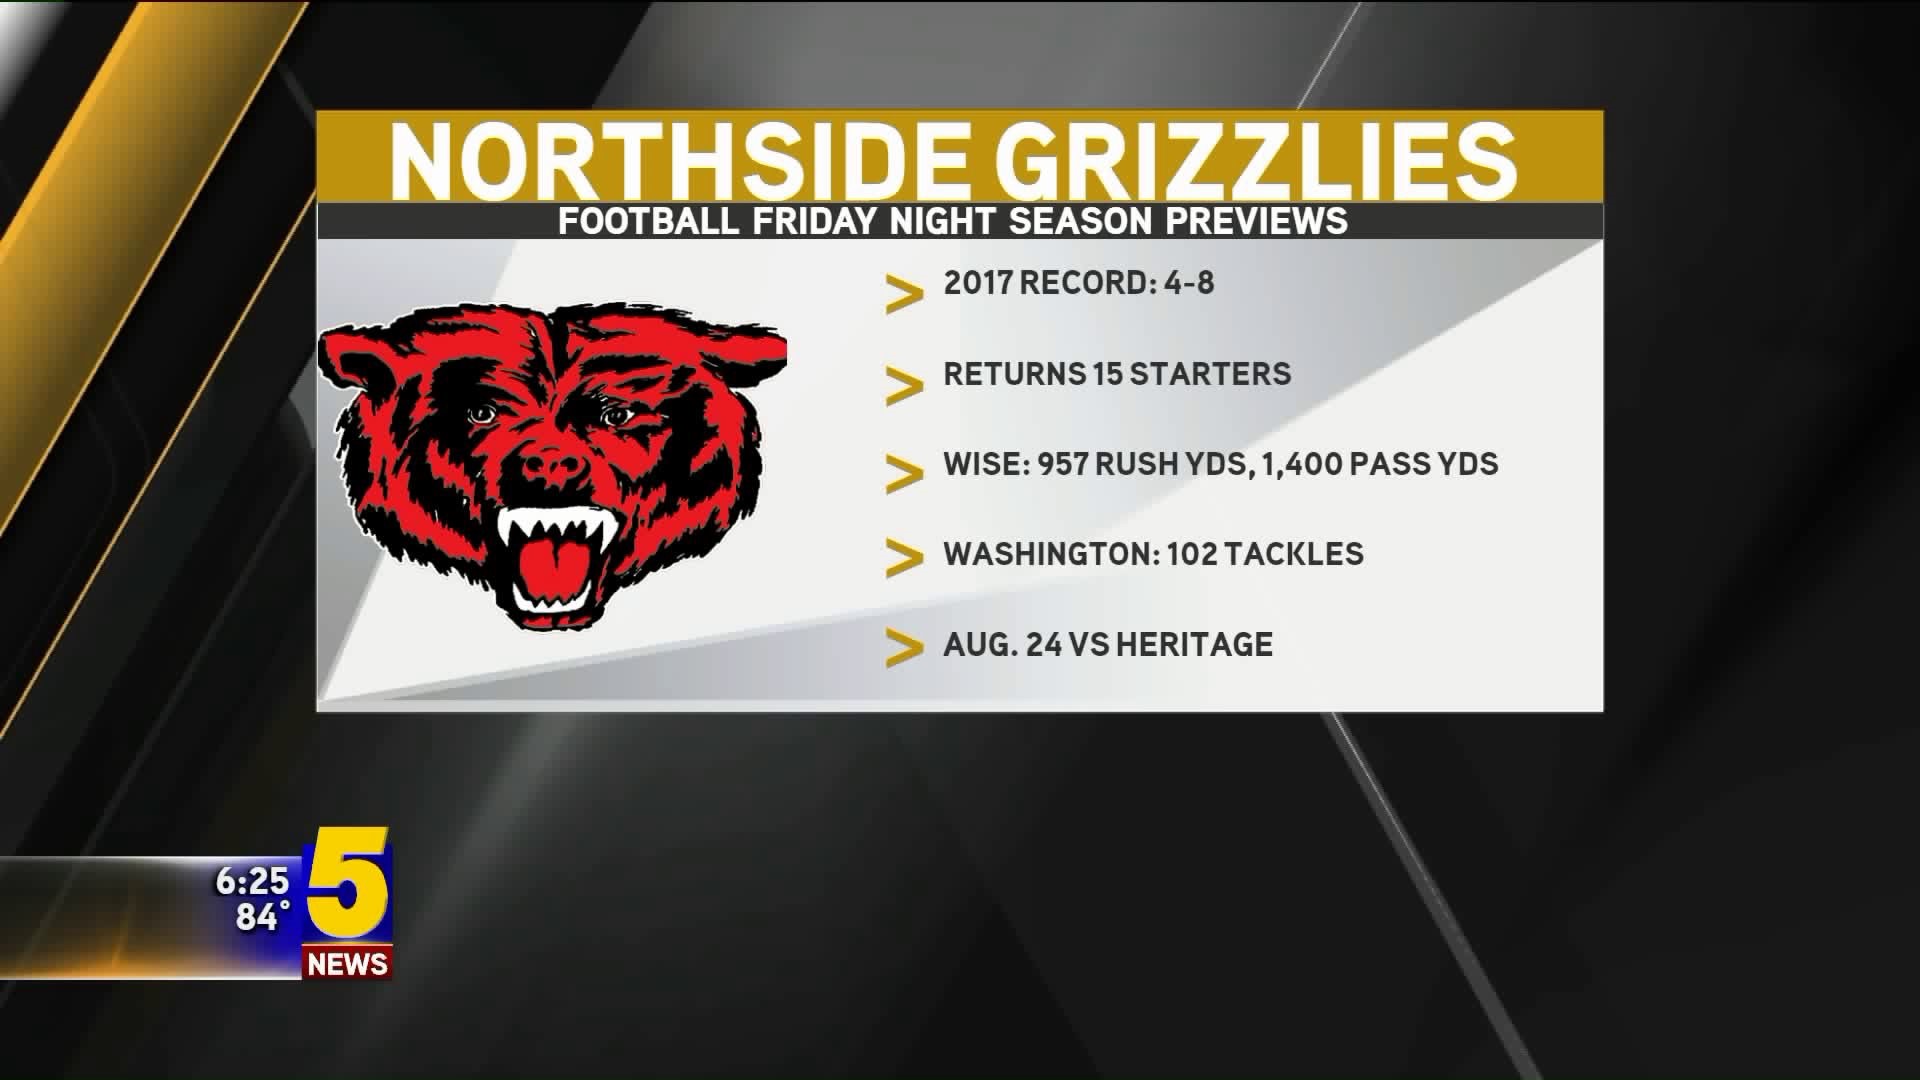 Grizzlies geared up for big year